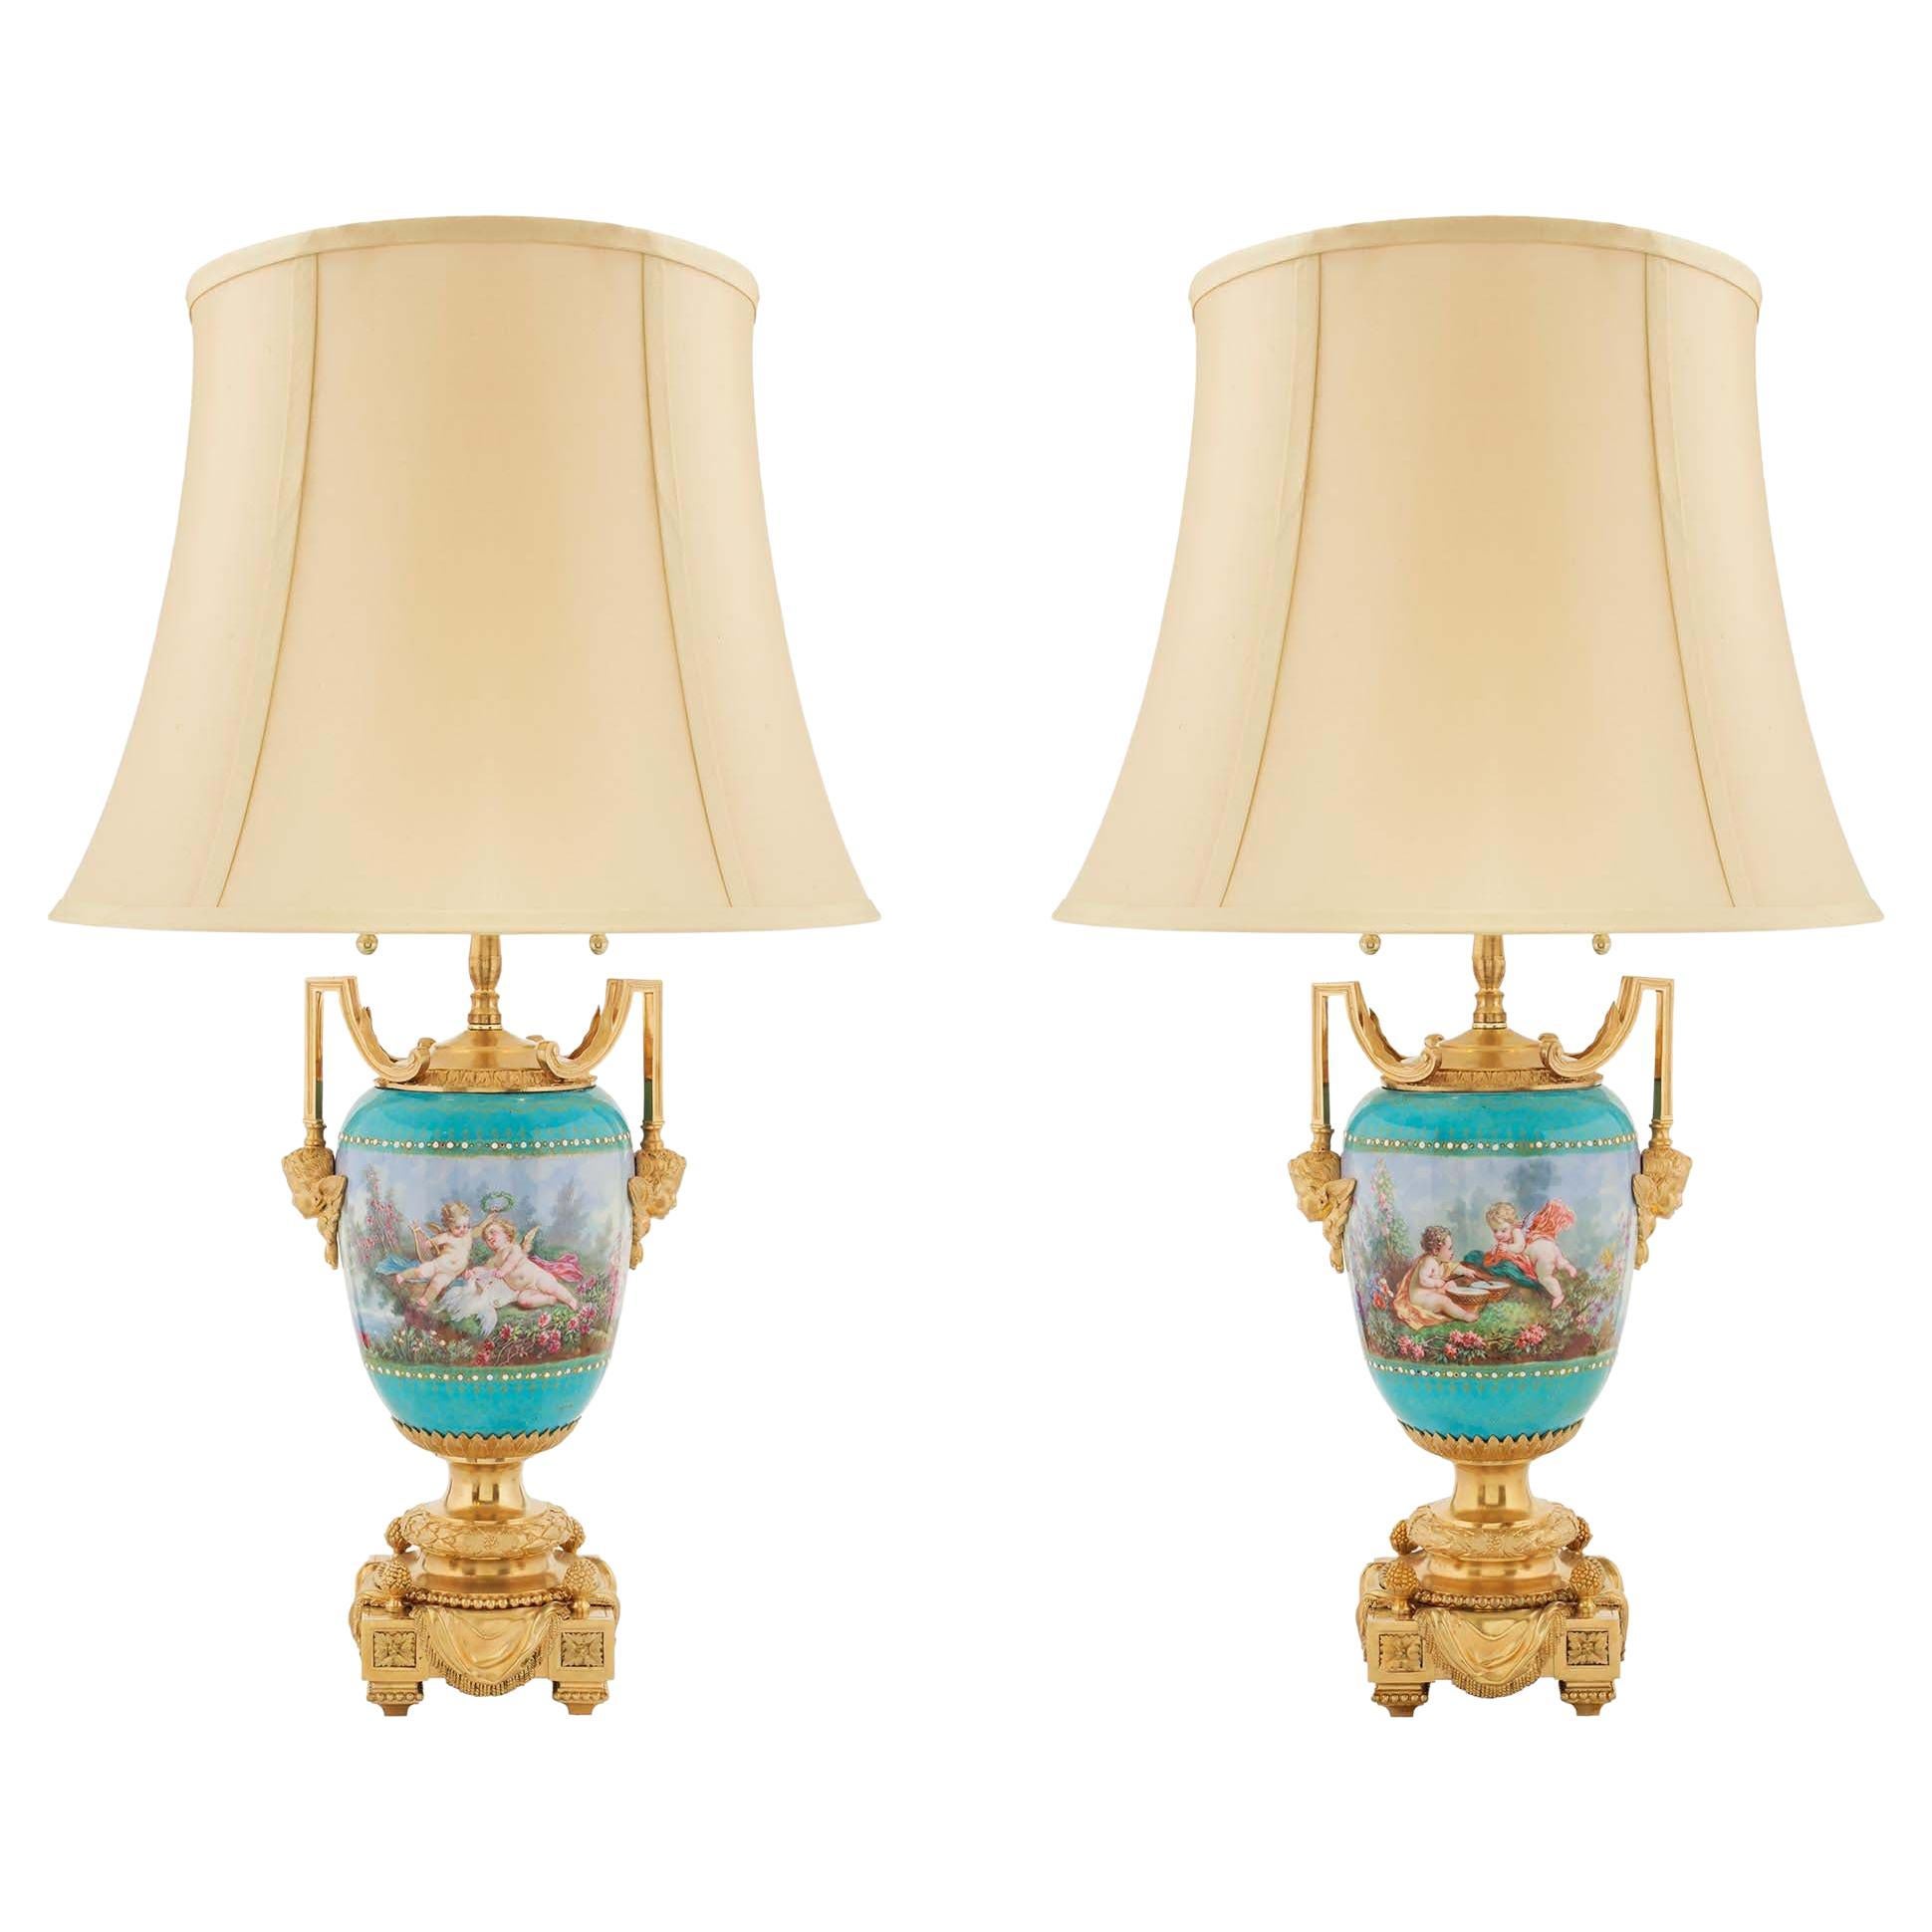 Pair of French 19th Century Louis XVI Style Ormolu and Porcelain Lamps by Picard For Sale